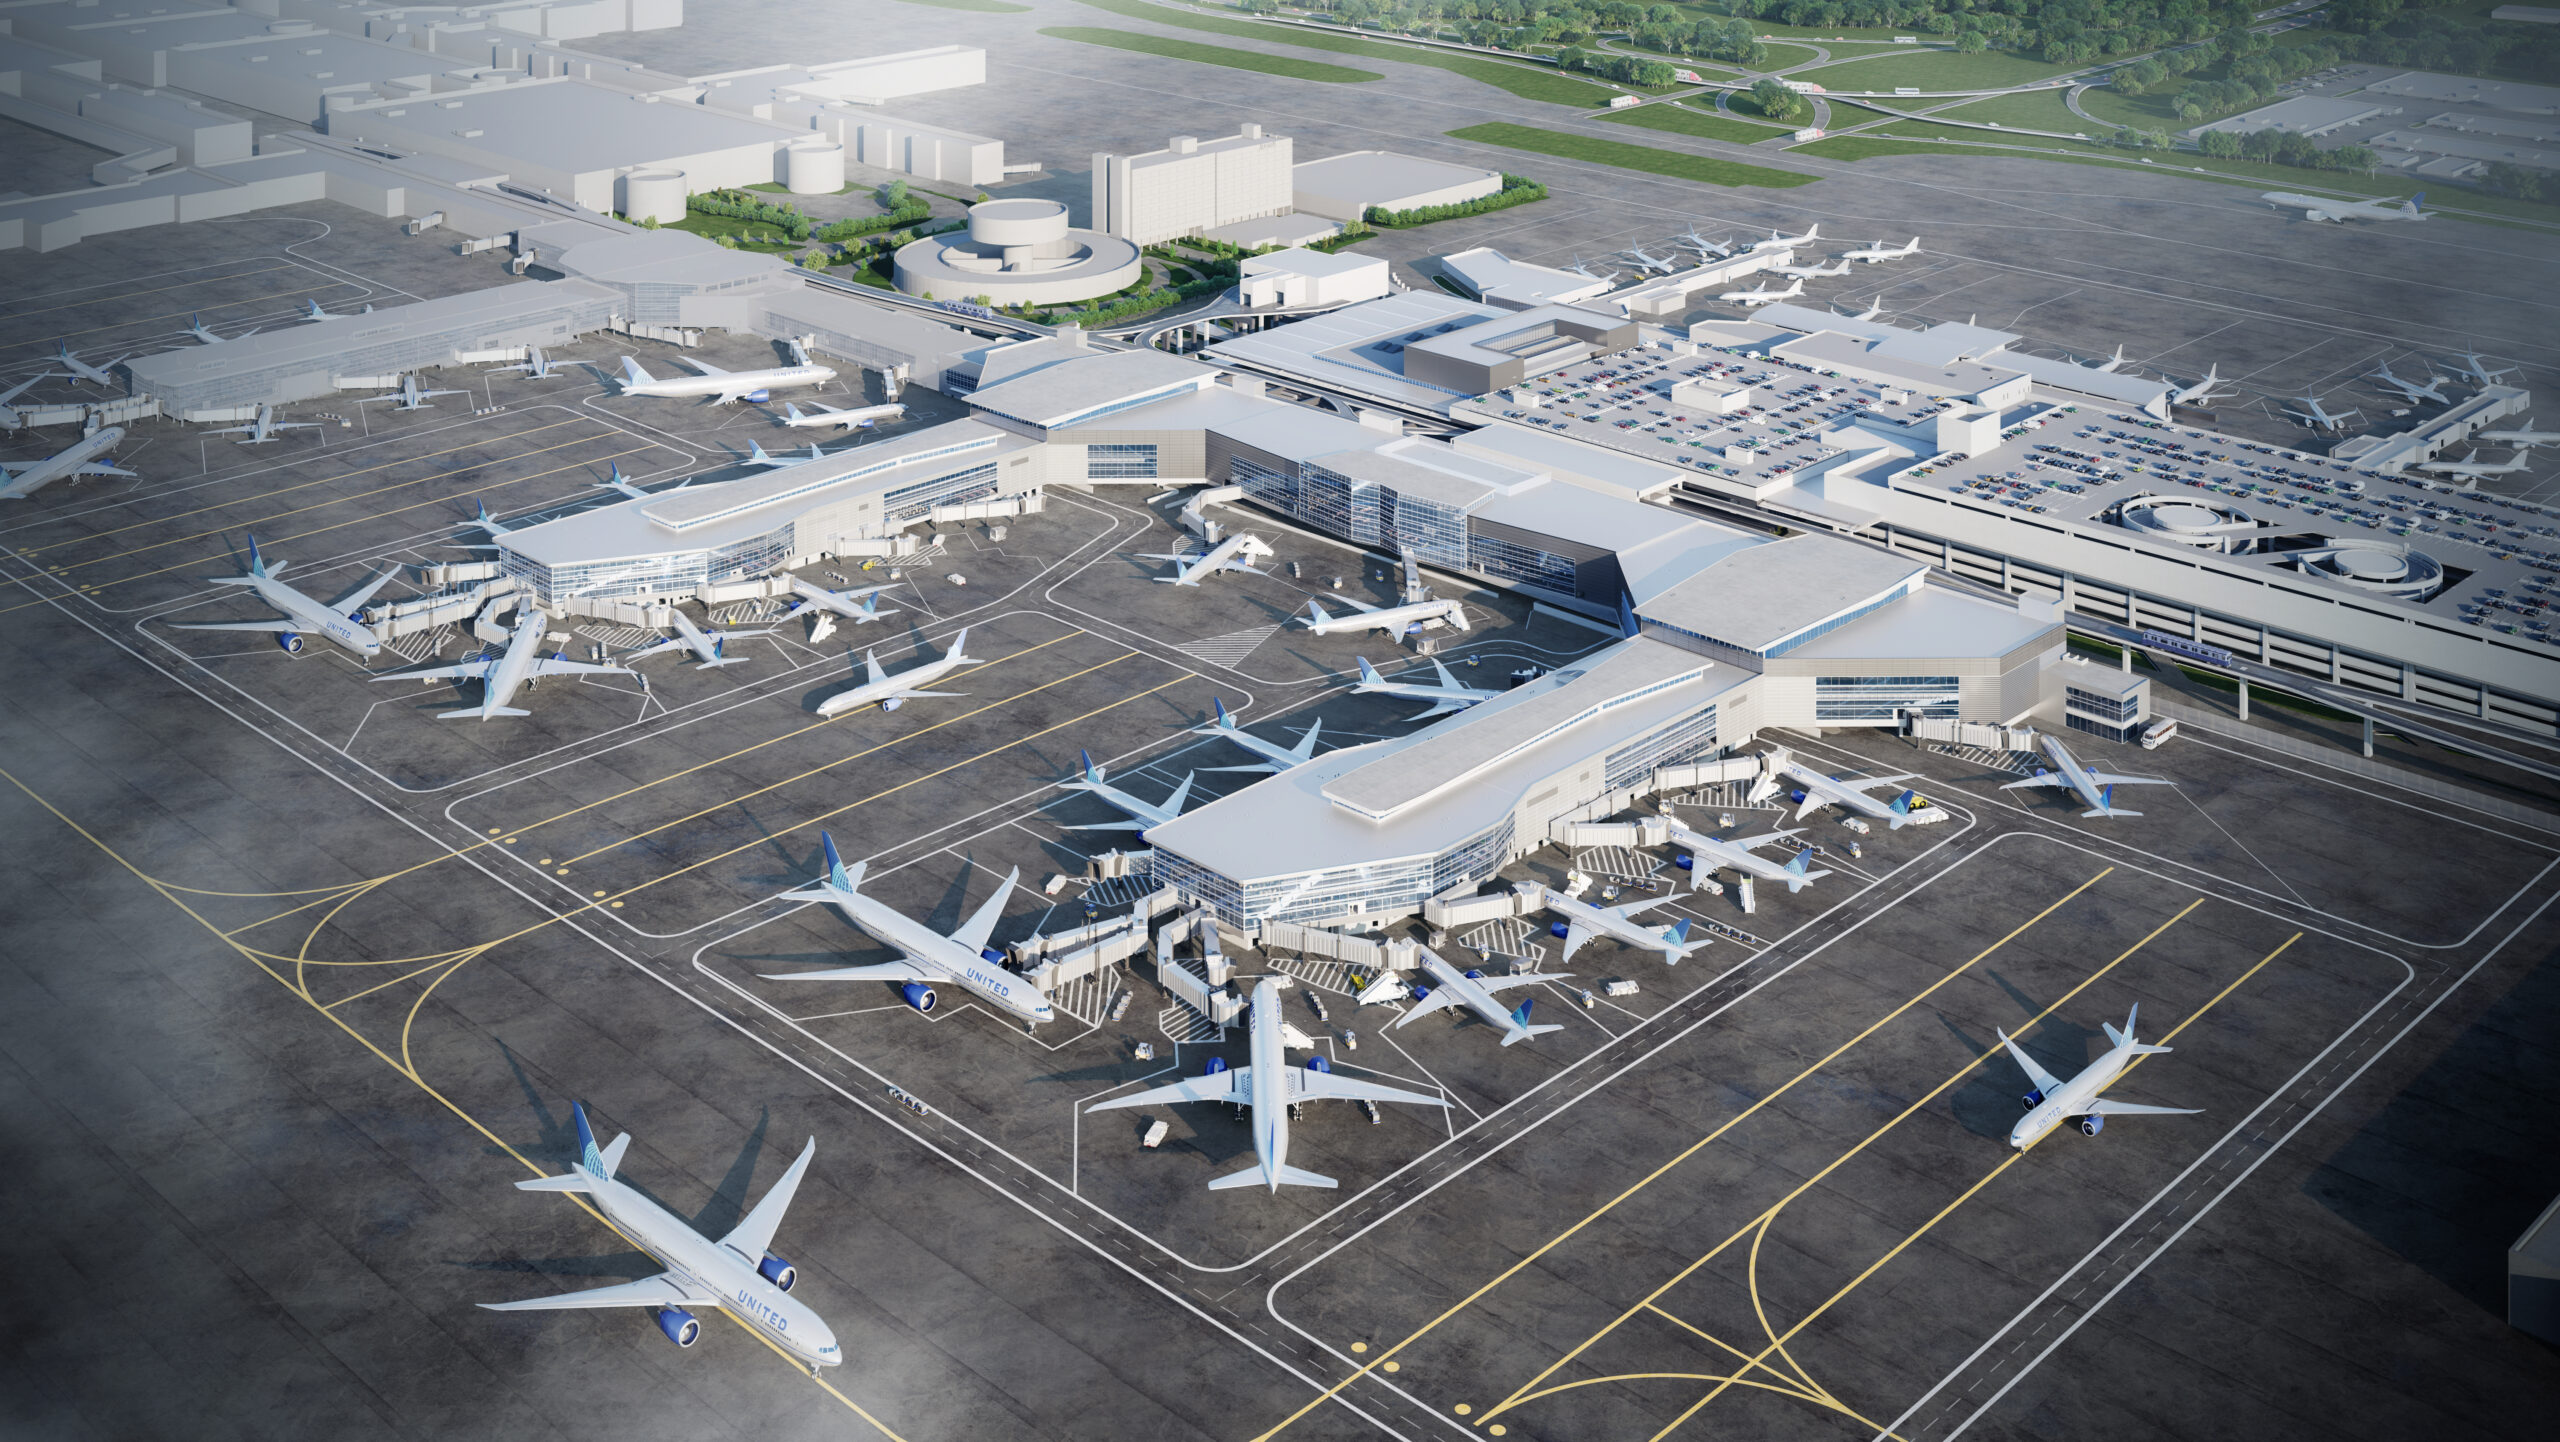 IAH Terminal B Transformation Program to accommodate a projected 36 million future passengers with brand new gates and amenities for travelers